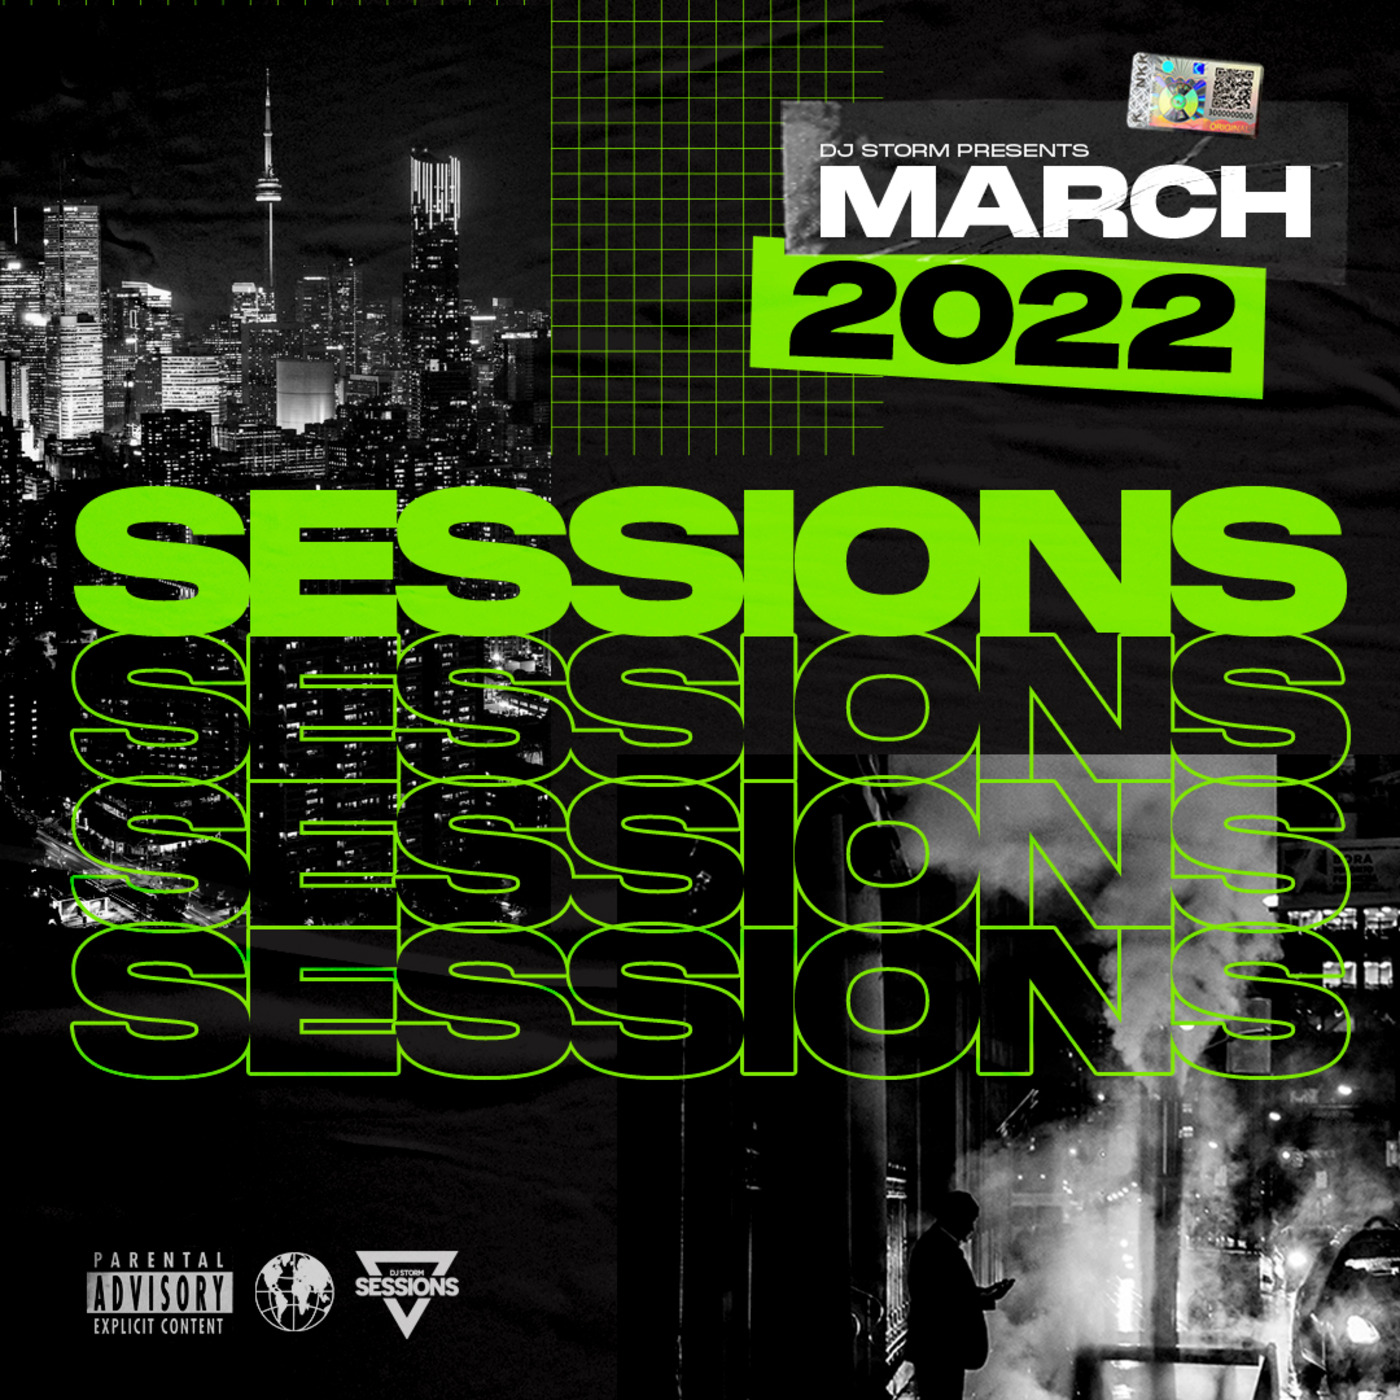 The Sessions: March 2022 (Volume 1)